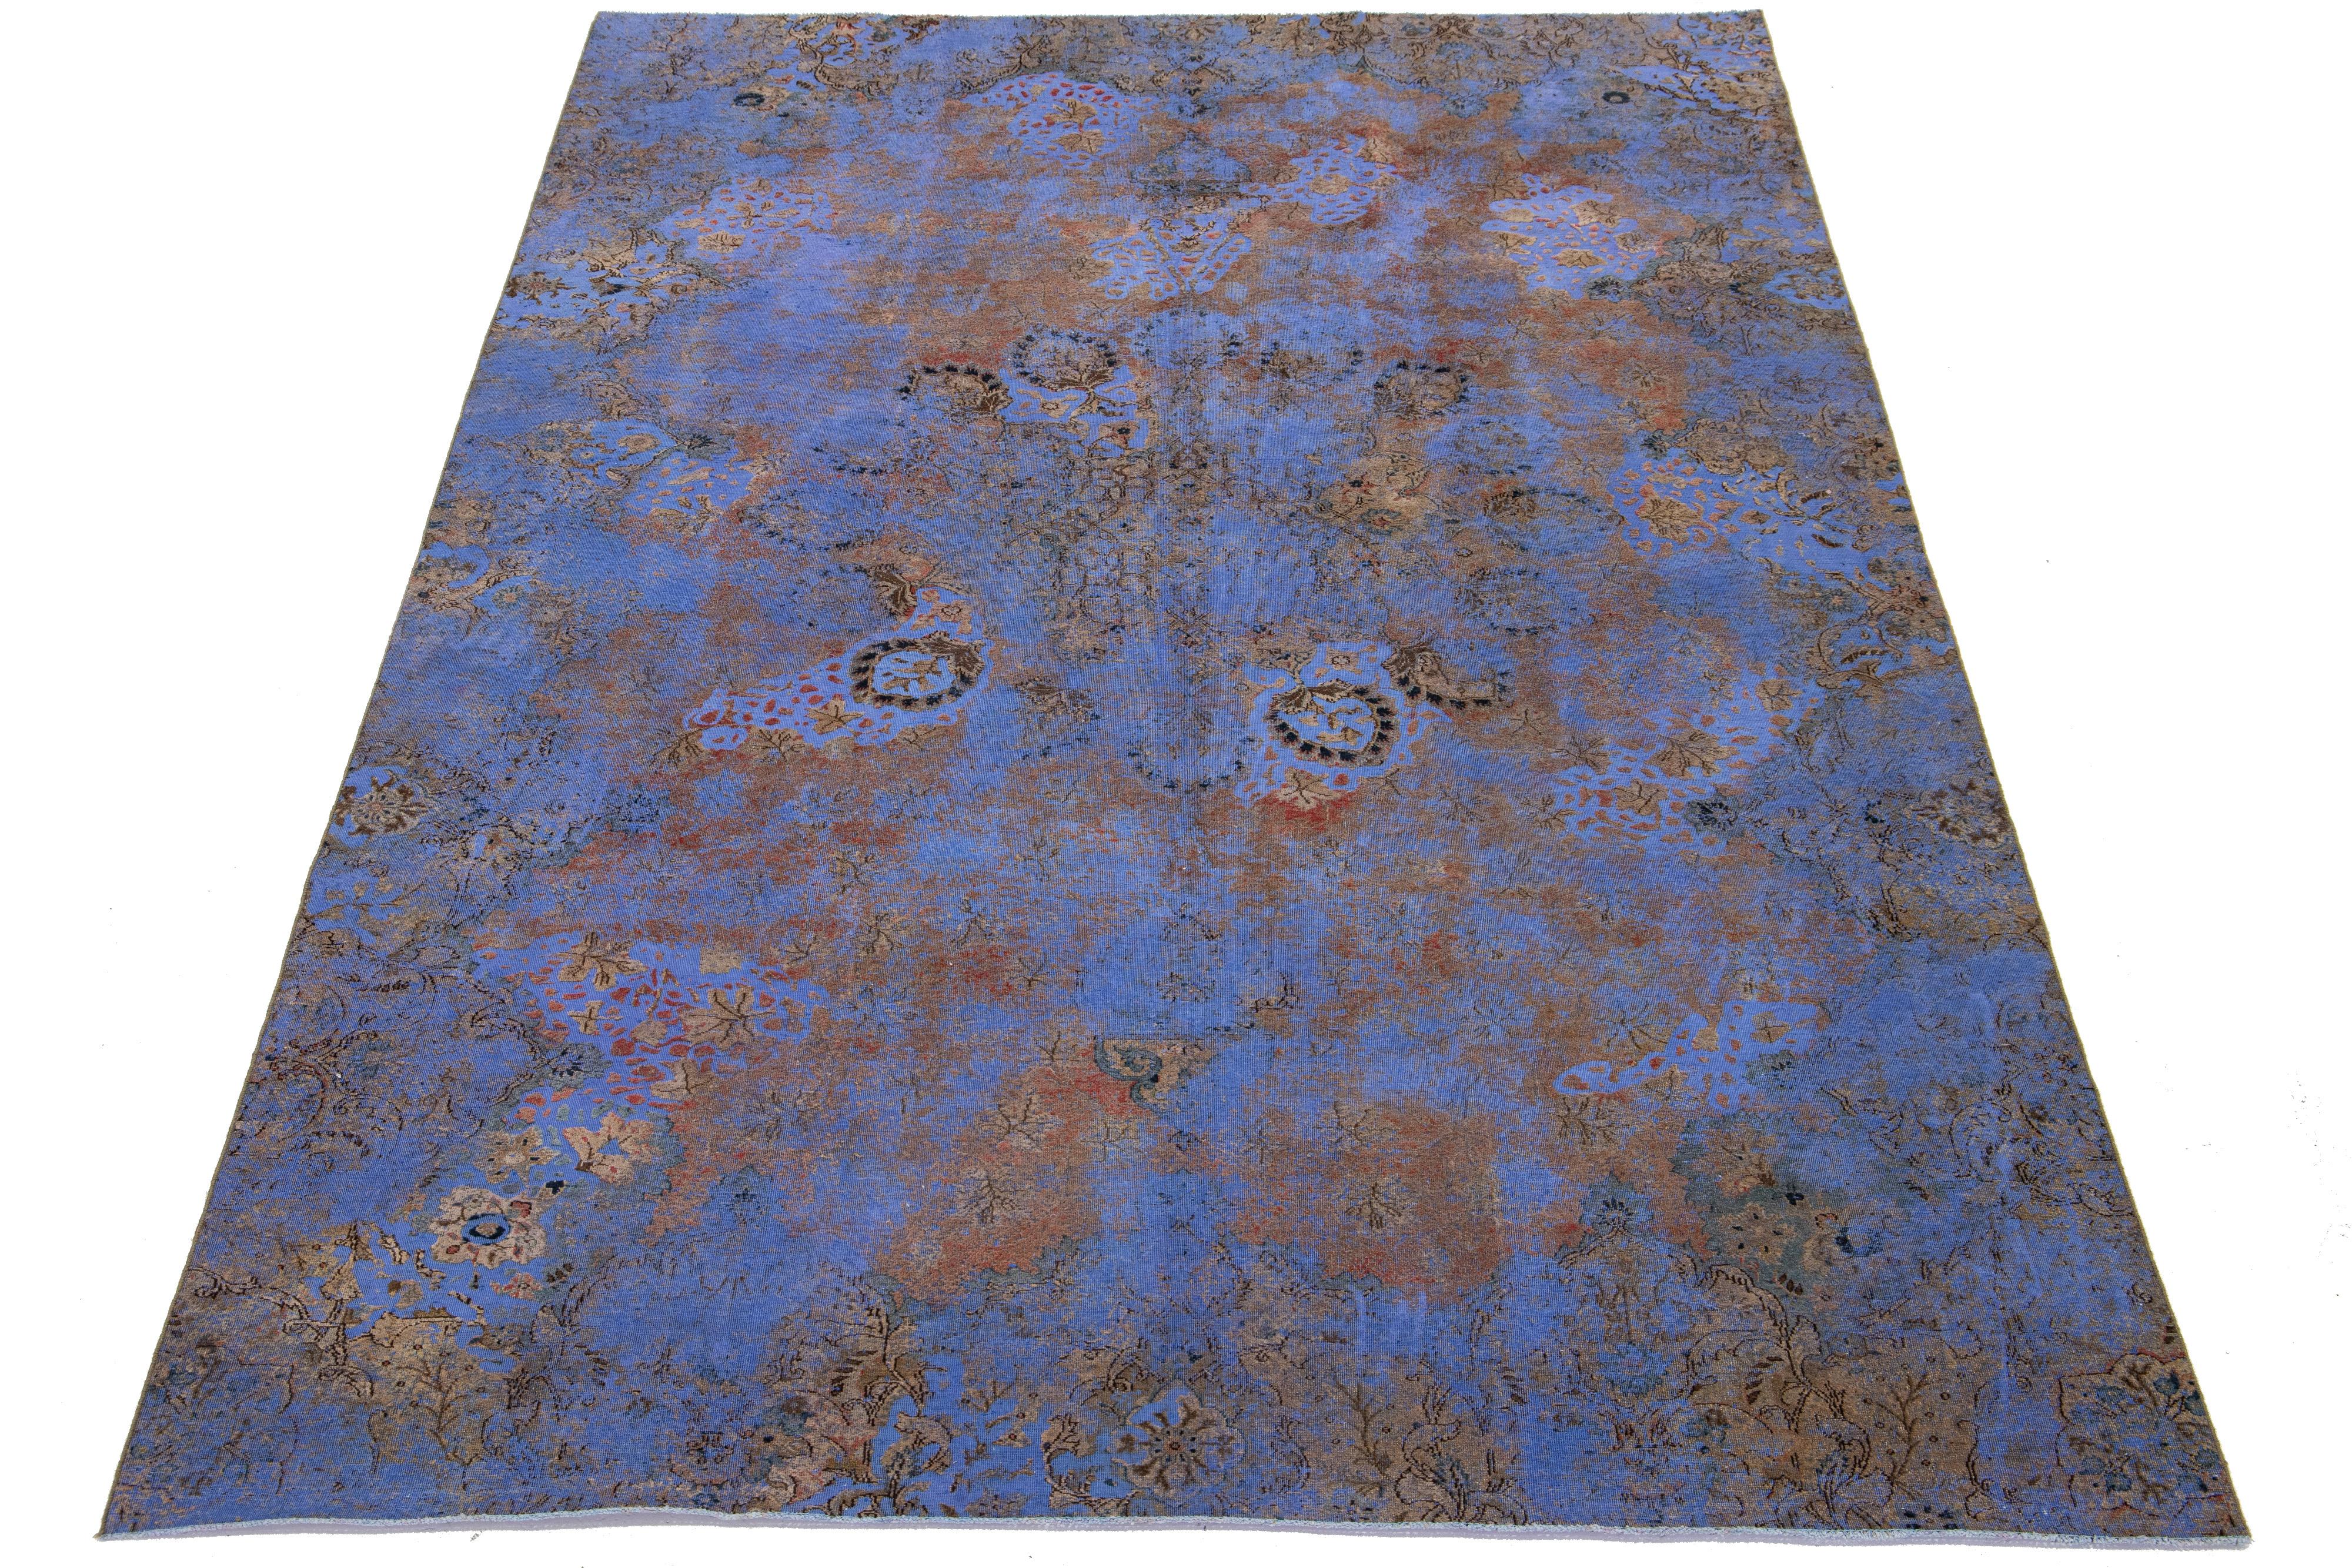 This antique blue Persian wool rug features a floral design with beige, rust, and brown accents.

This rug measures 7'5'' x 12'5